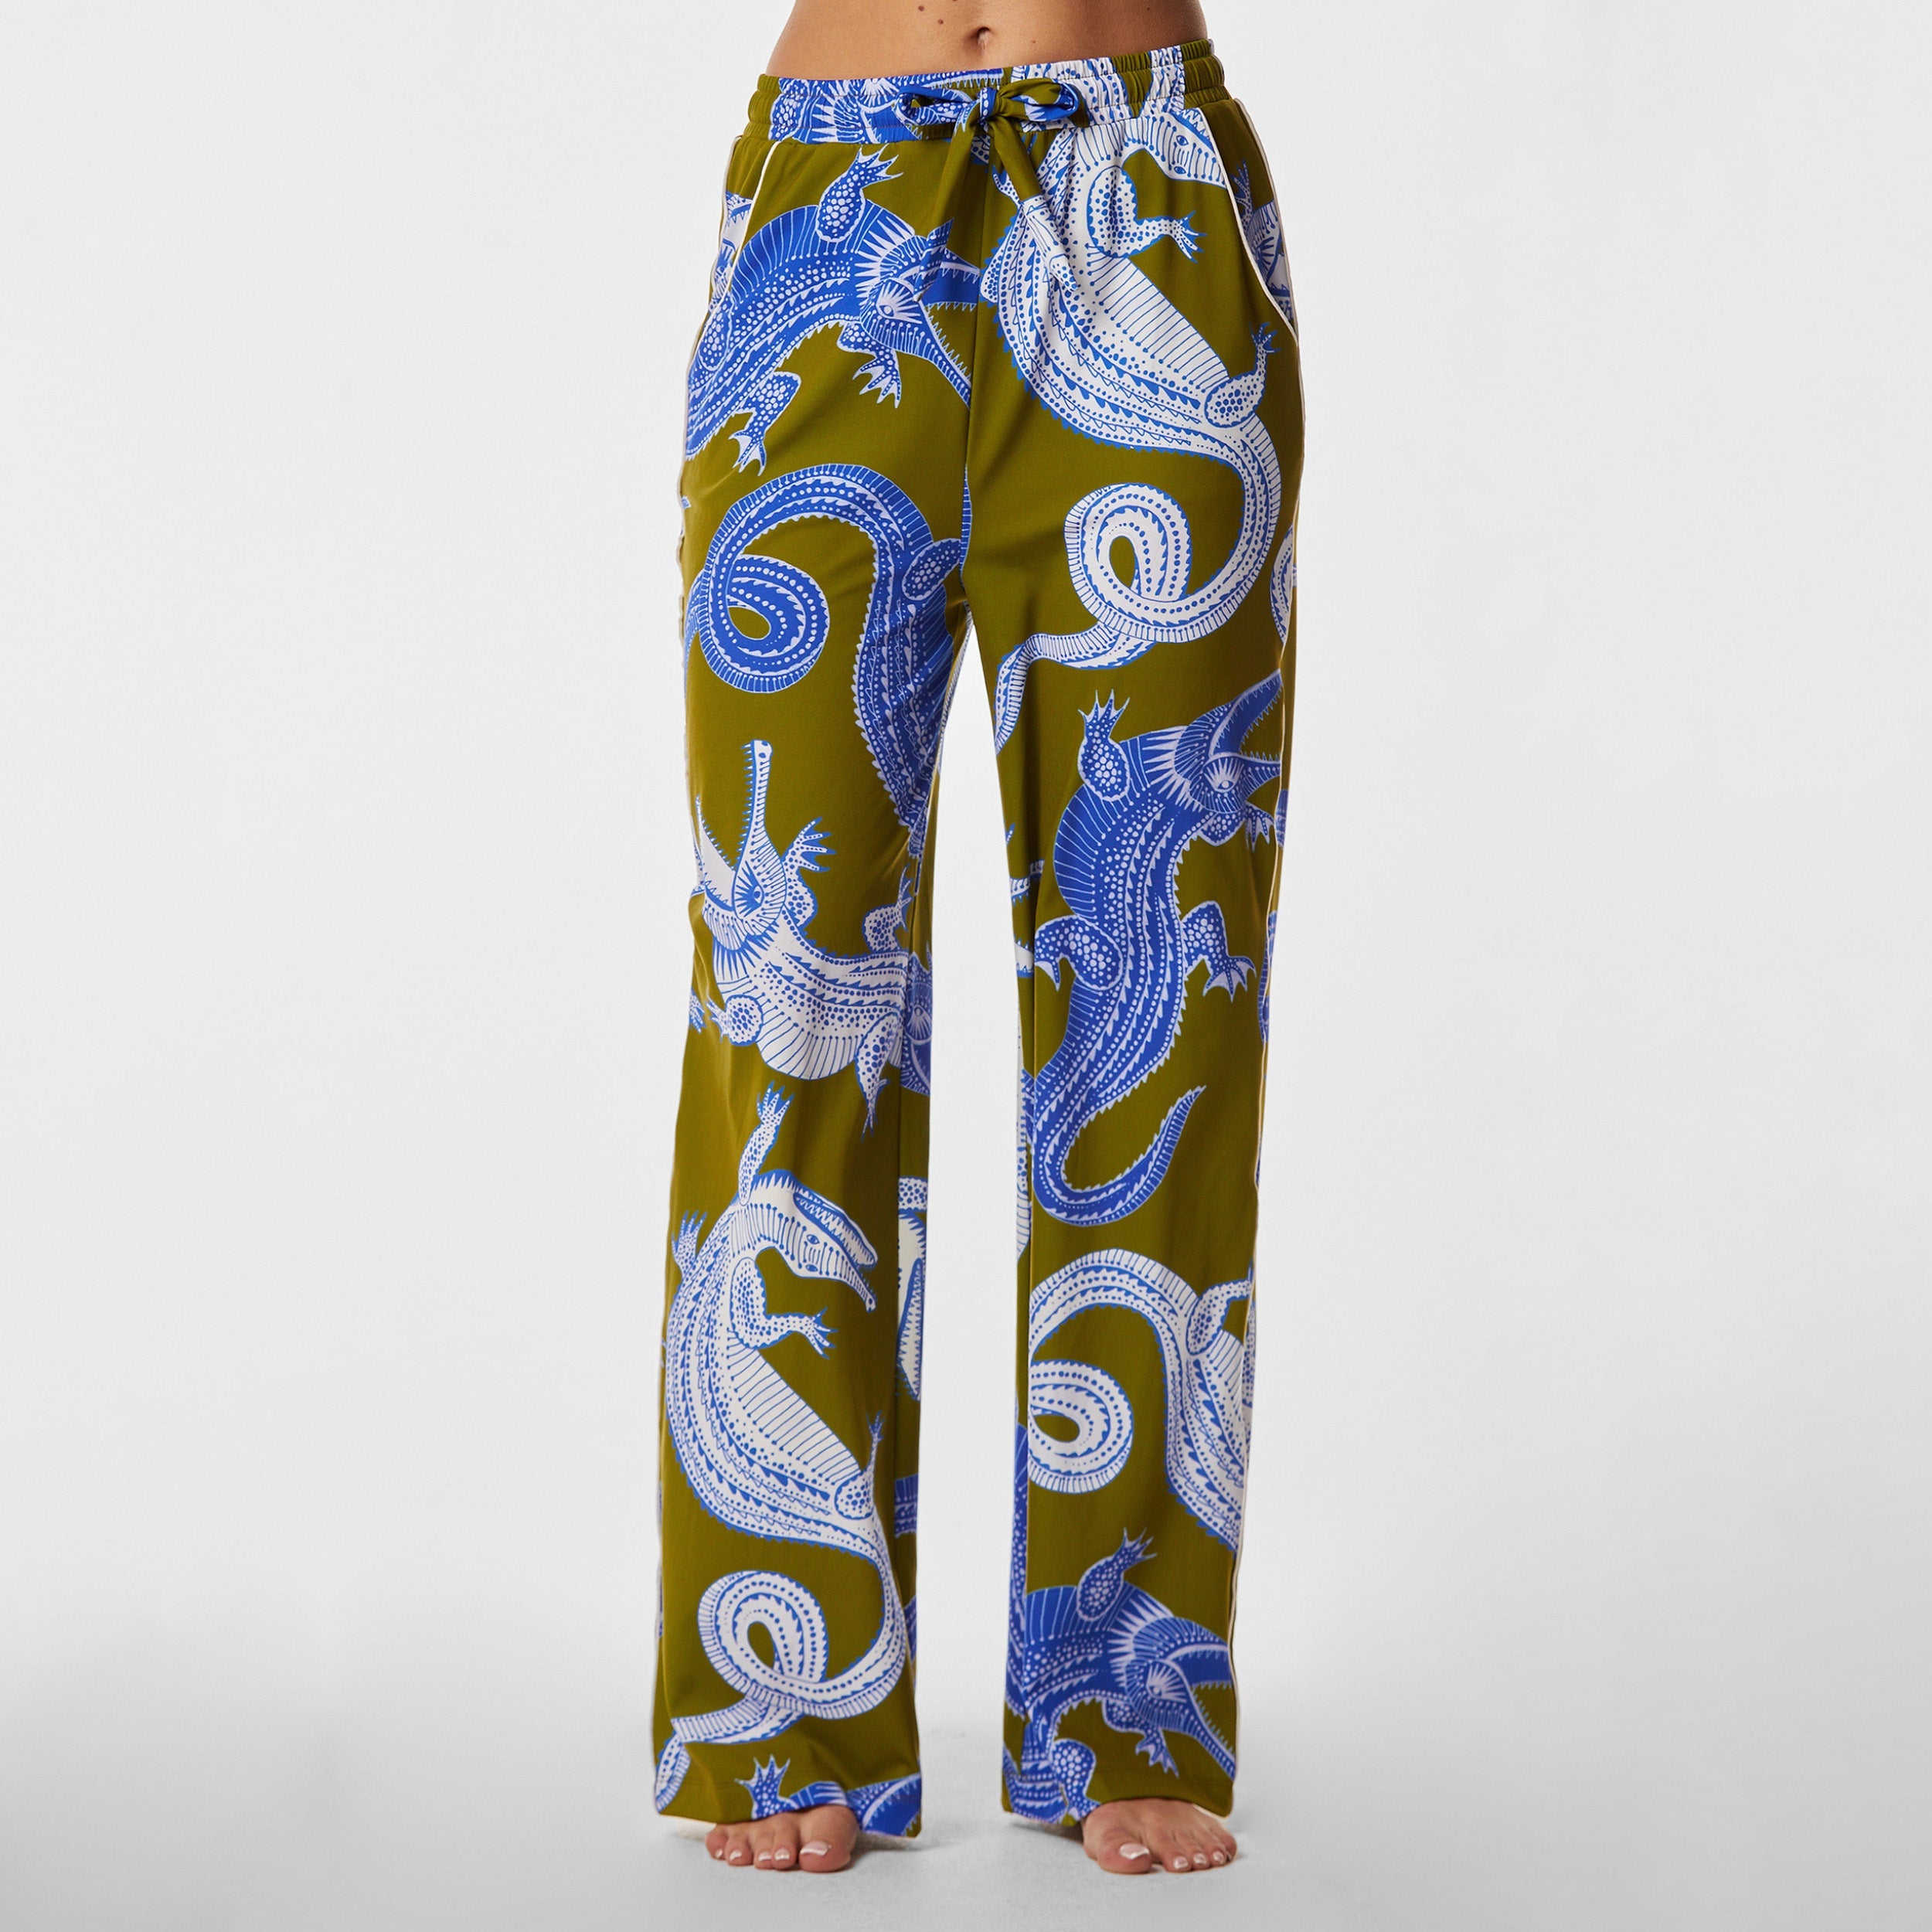 Front view of woman wearing breathable, relaxed and buttery smooth pajama pant featuring high-waist cut, side pockets, front tie and stunning Nile gator print.